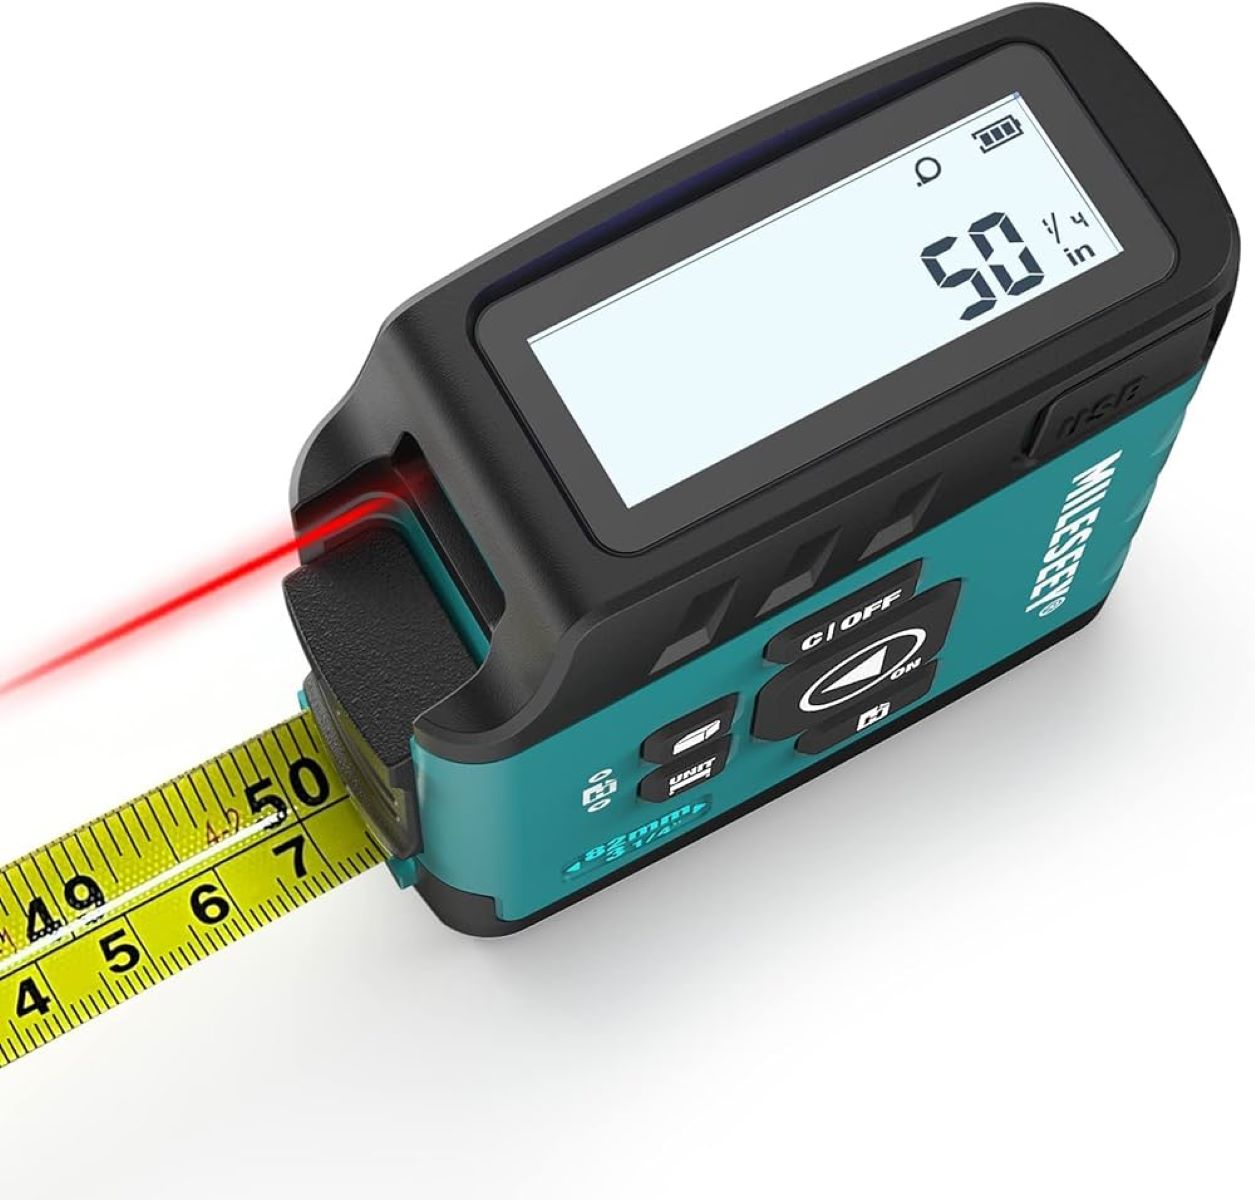 How To Use A Laser Measuring Tape